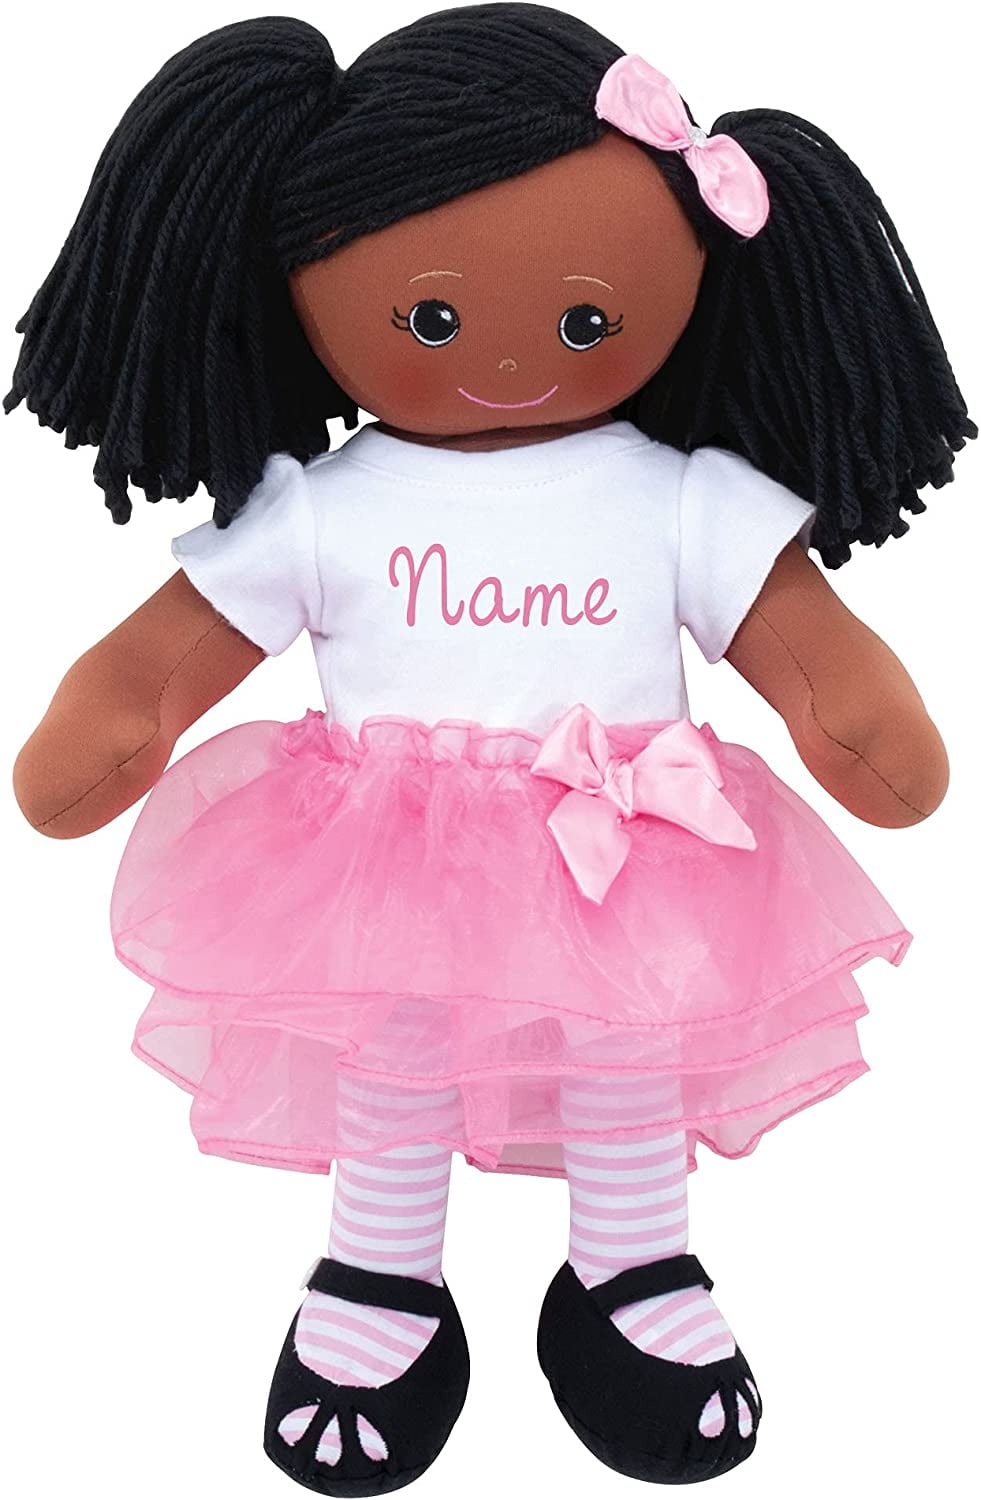 Clip Ballerina With Hair Personalized Doll and Tutu